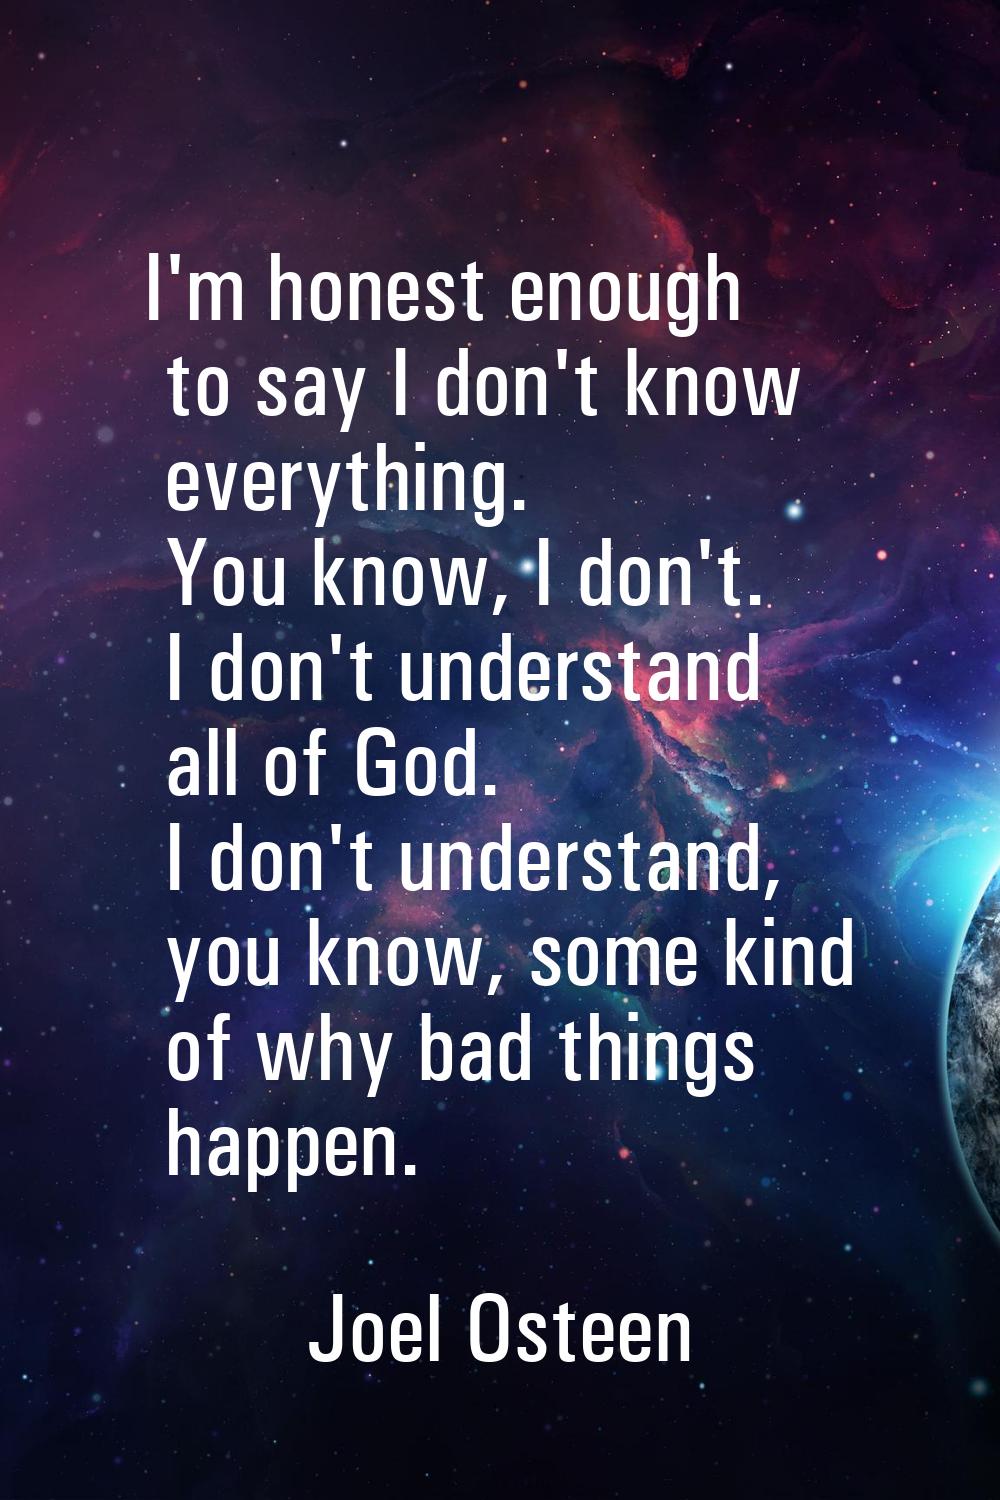 I'm honest enough to say I don't know everything. You know, I don't. I don't understand all of God.